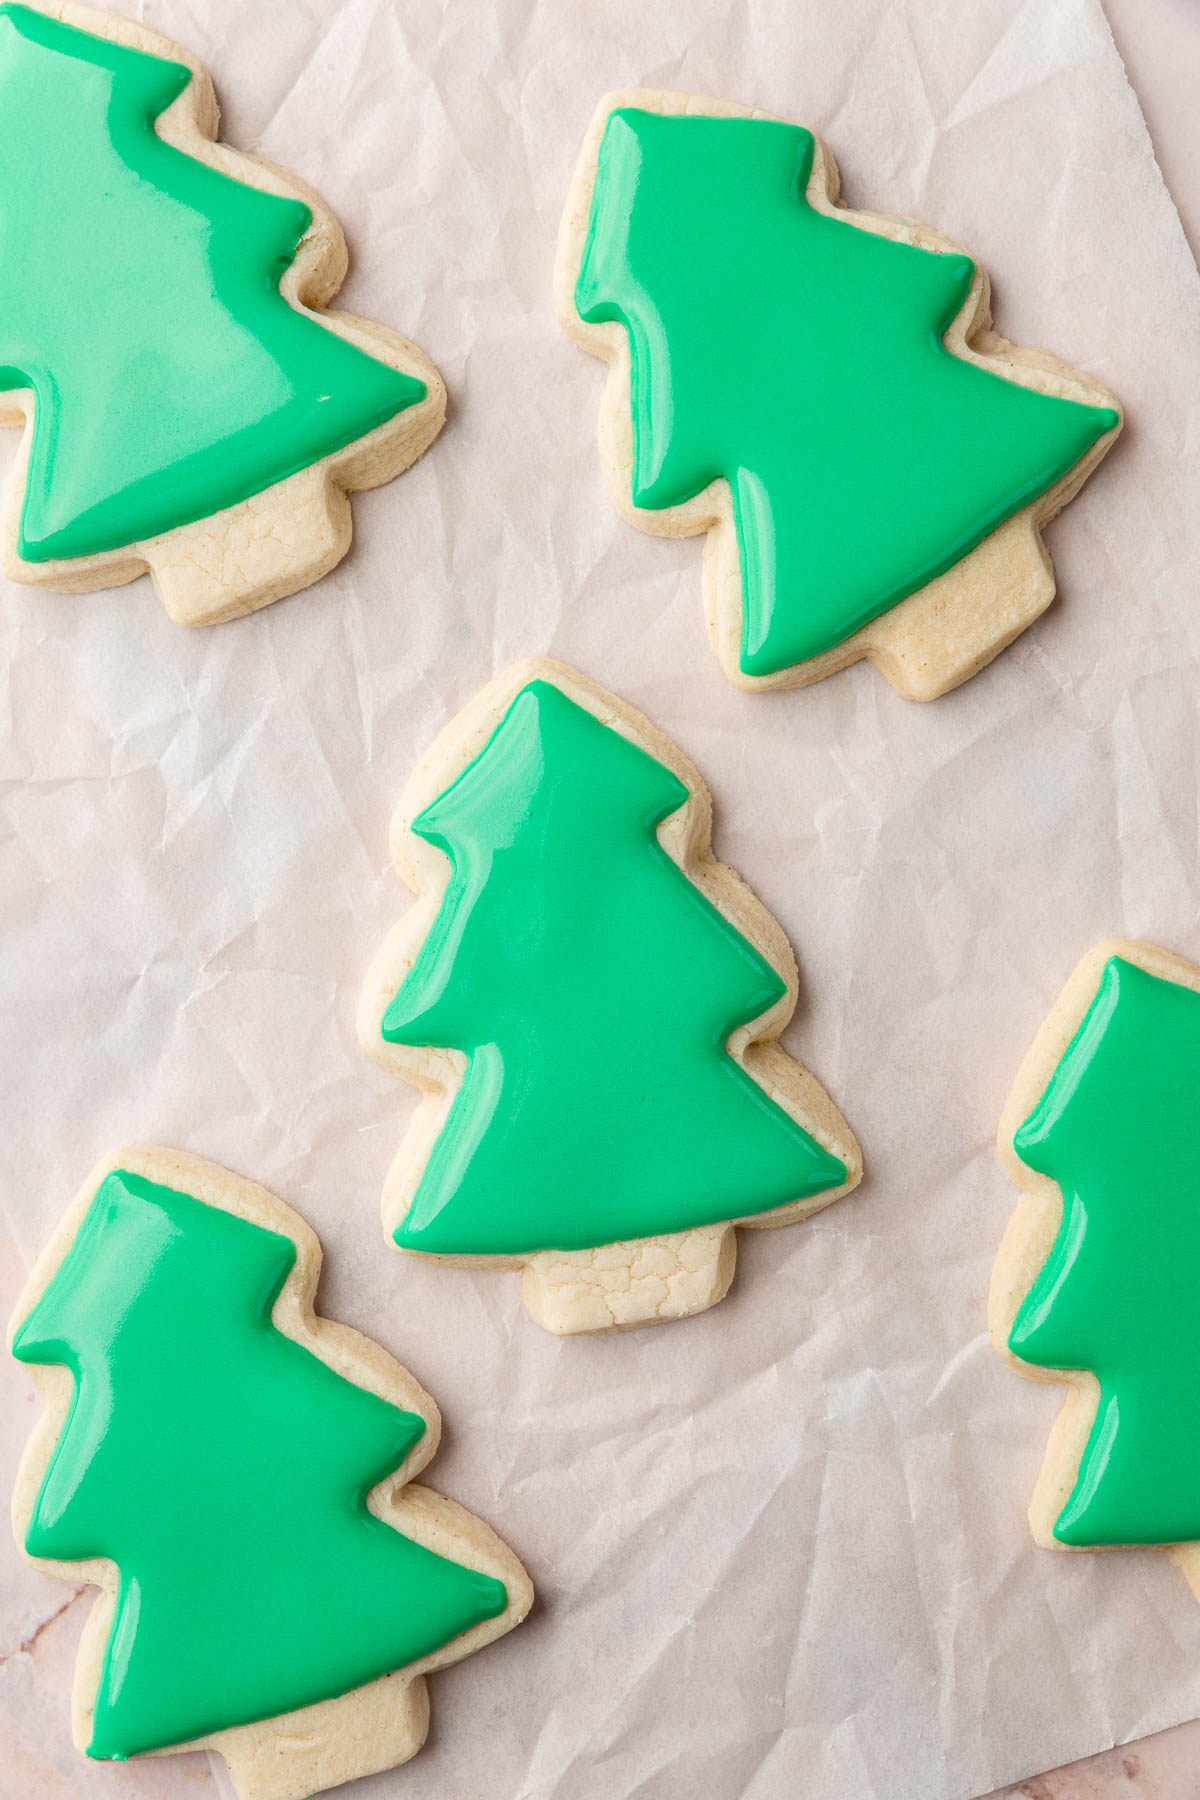 Multiple gluten-free Christmas tree sugar cookies iced with green royal icing on a piece of parchment paper.